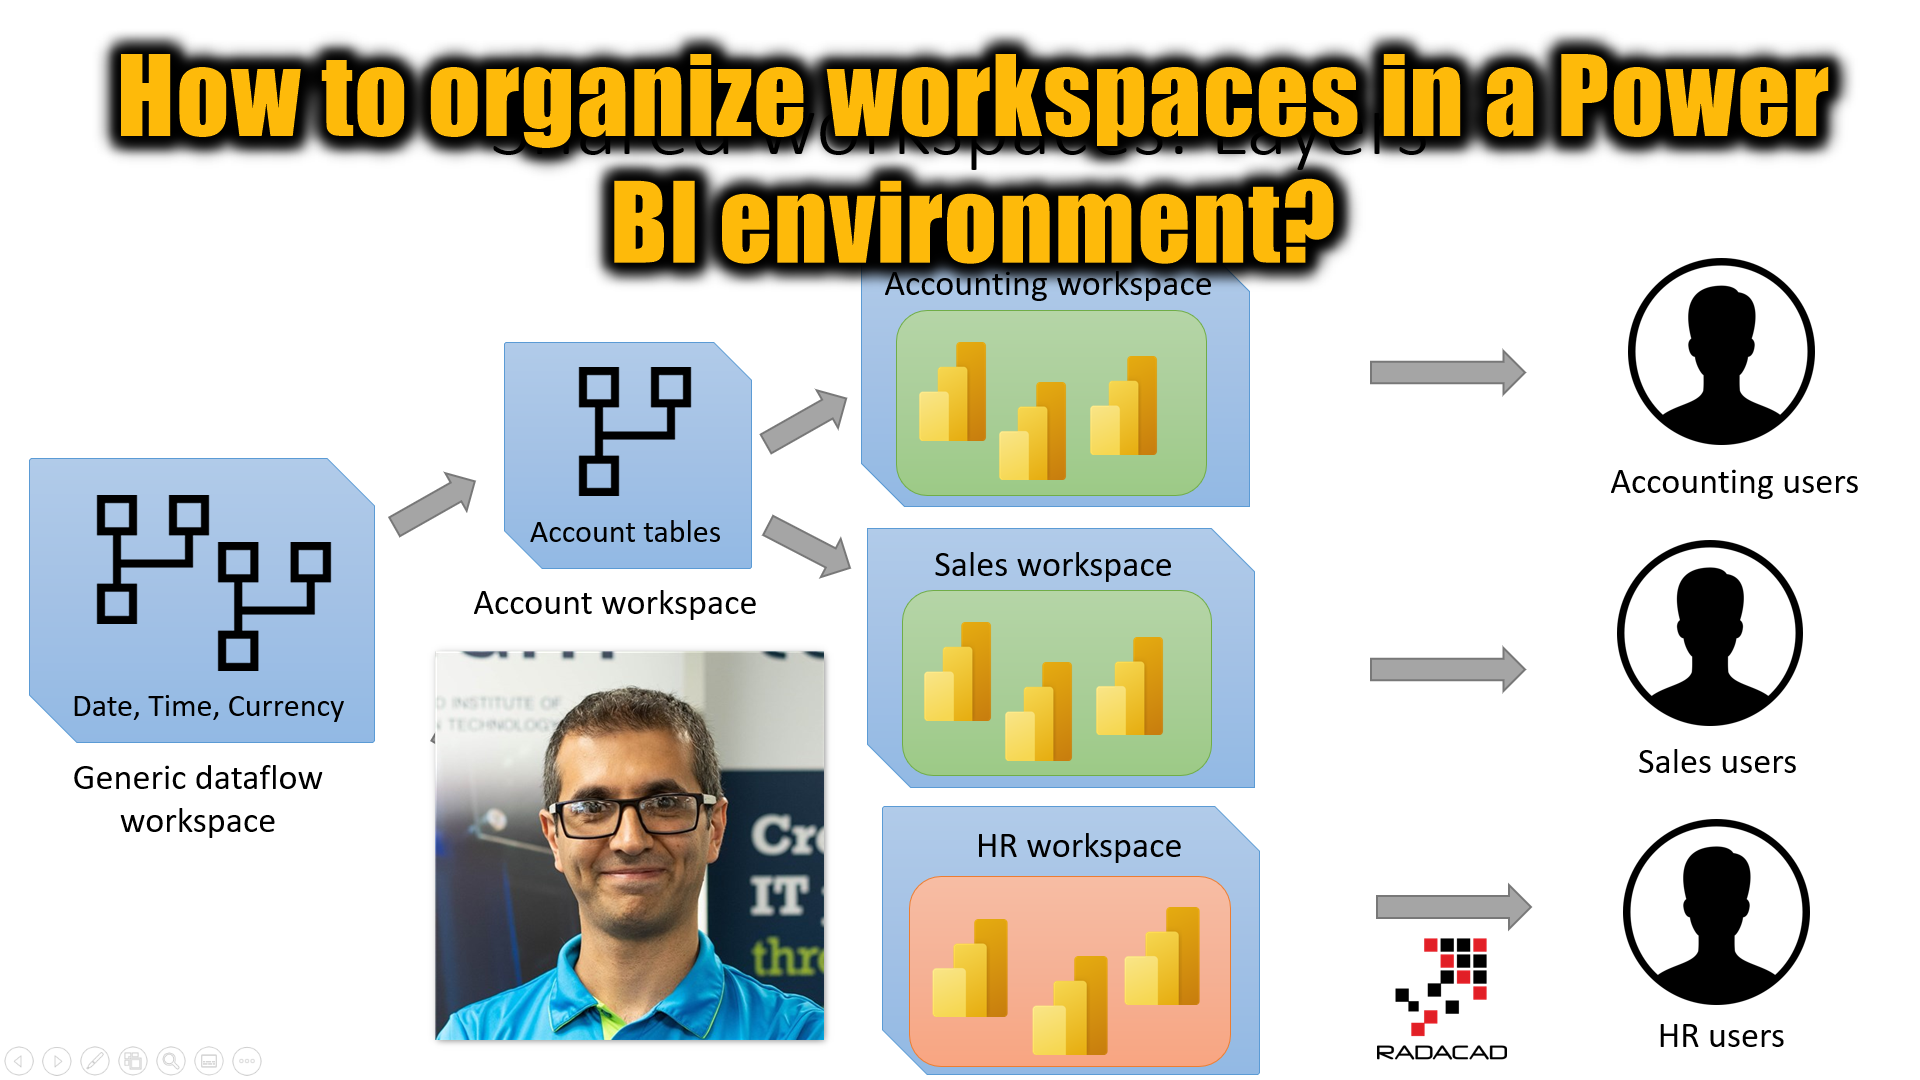 How to organize workspaces in a Power BI environment?